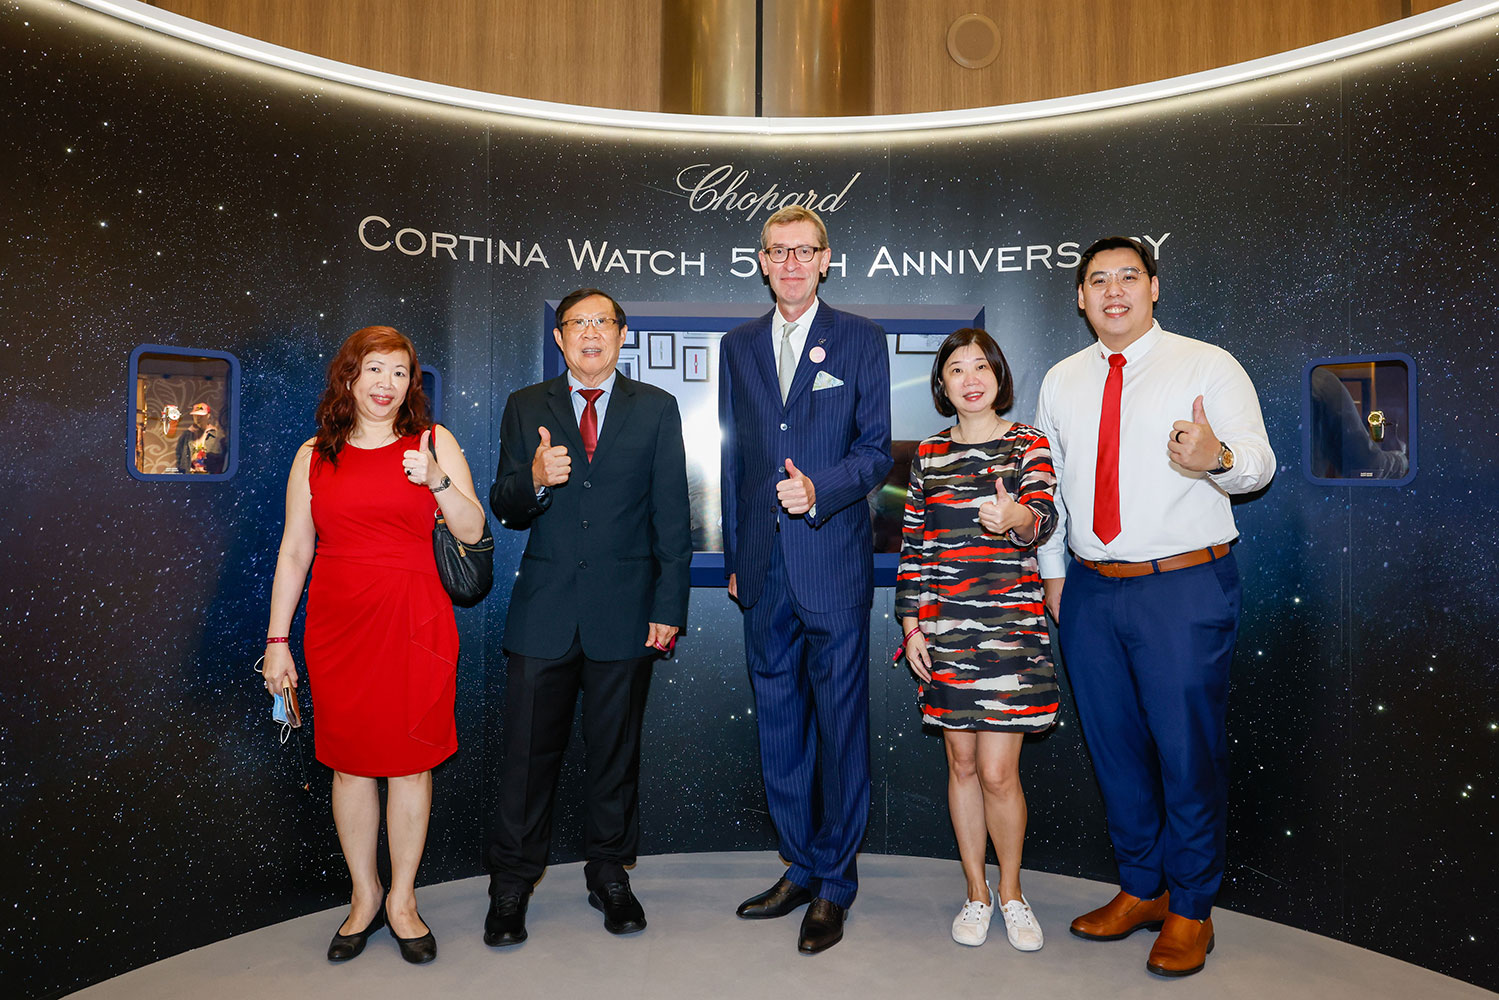 Chopard Exhibition Happy Sport Tale Of An Icon At Cortina Watch 50th Anniversary 7